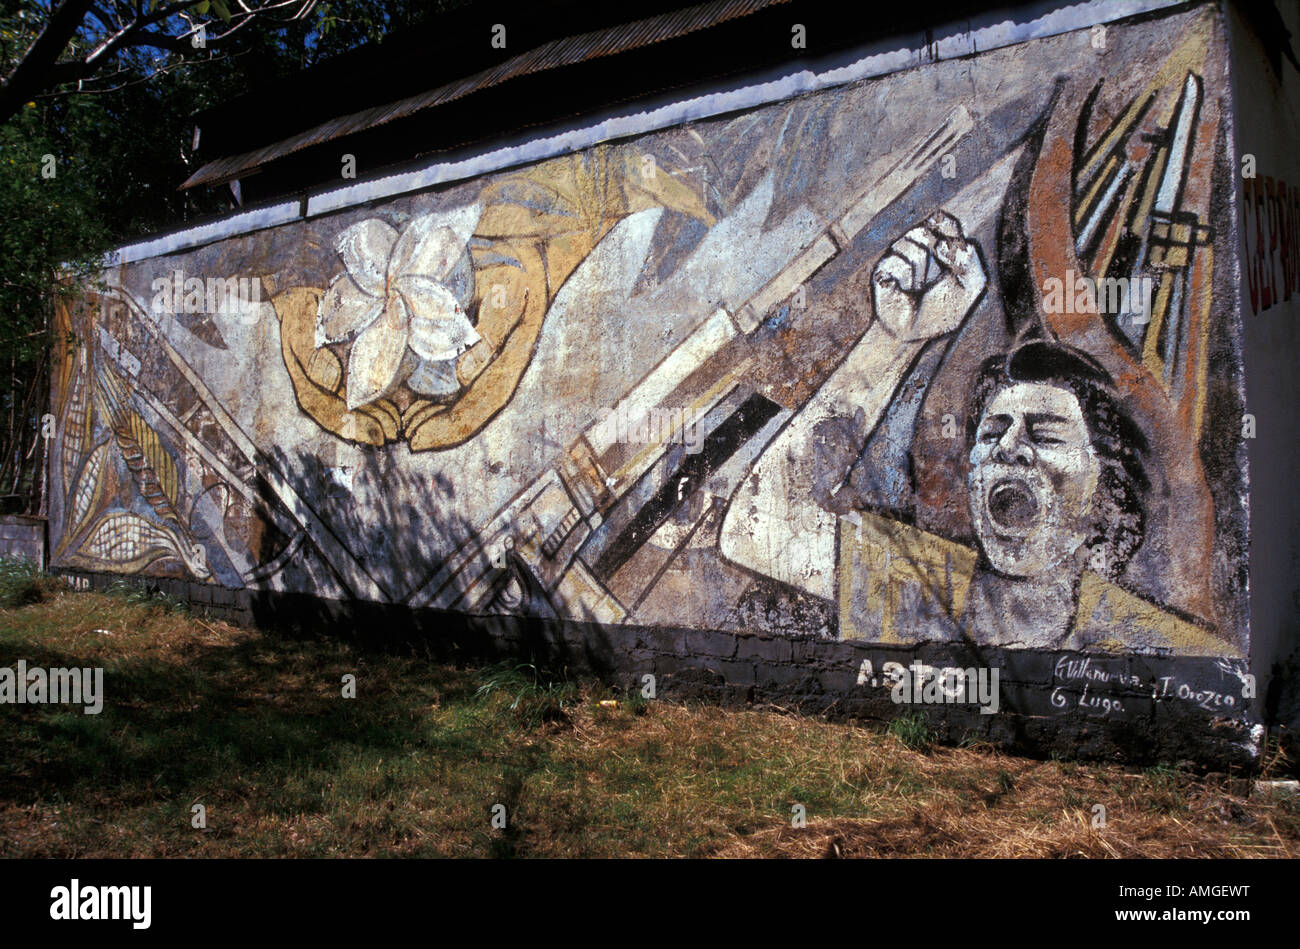 sandinista-mural-proclaiming-the-ideals-